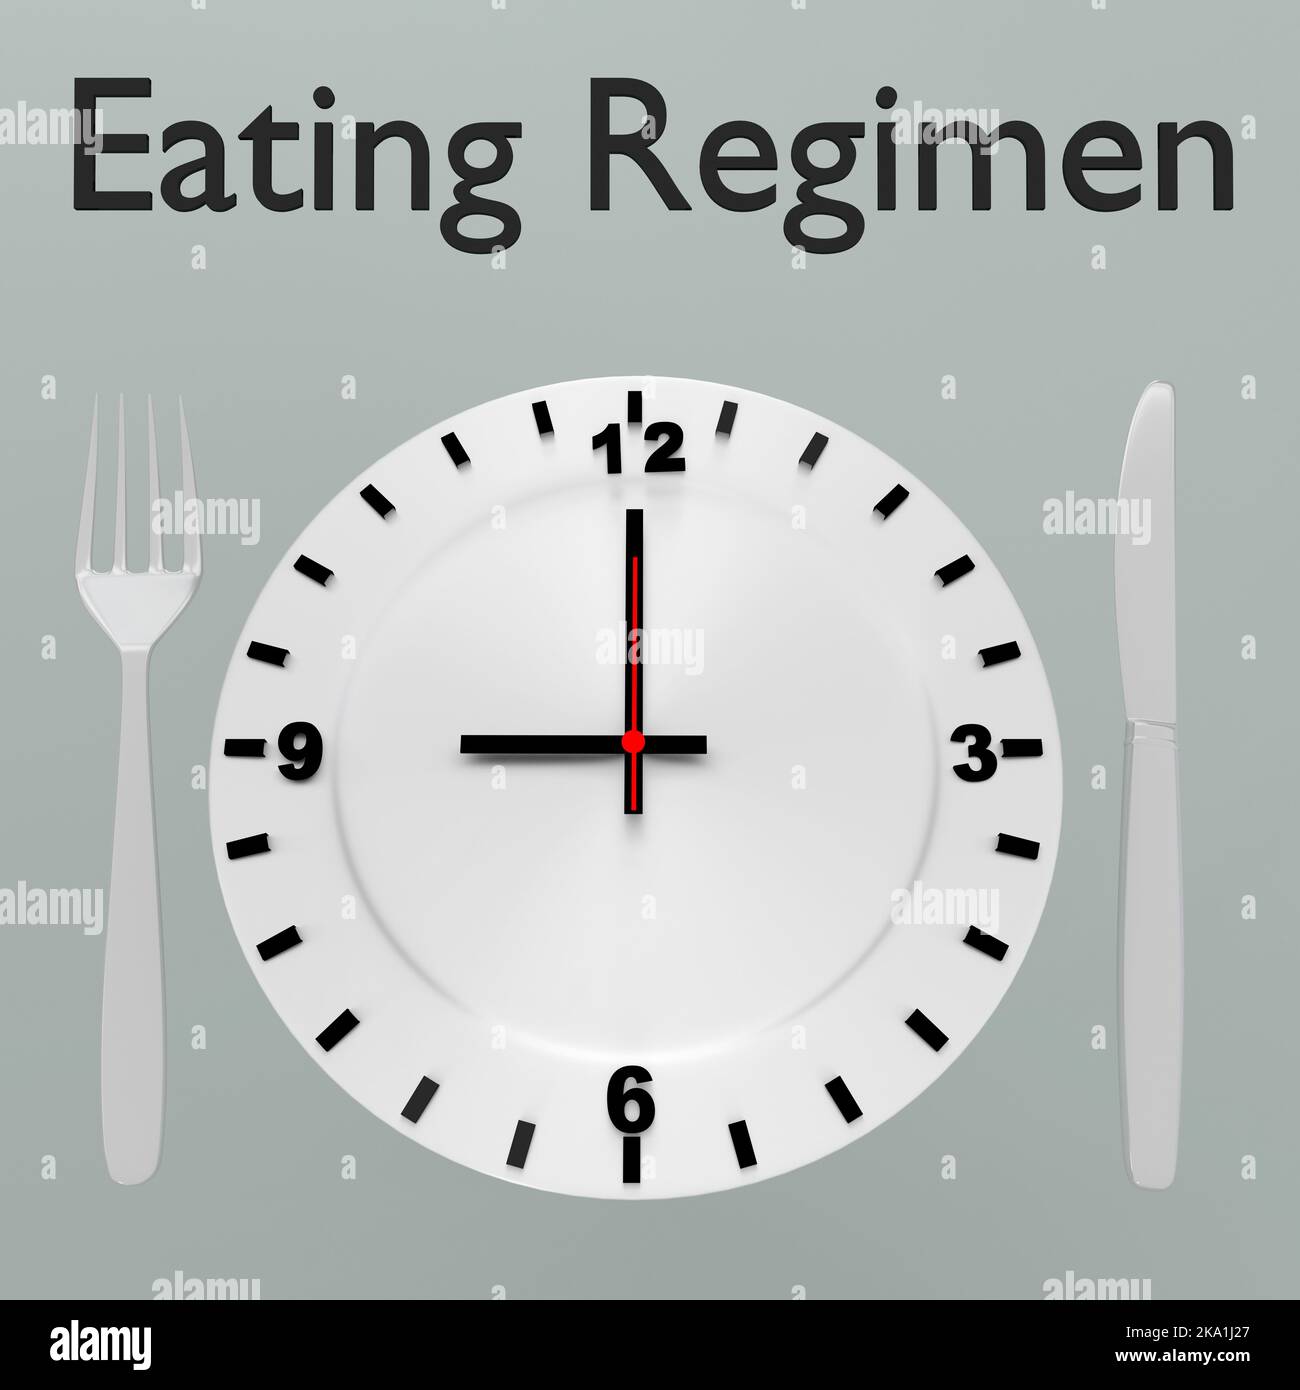 3D illustration of a clock on a white plate with silver knif and fork, titled as Eating Regimen. Stock Photo